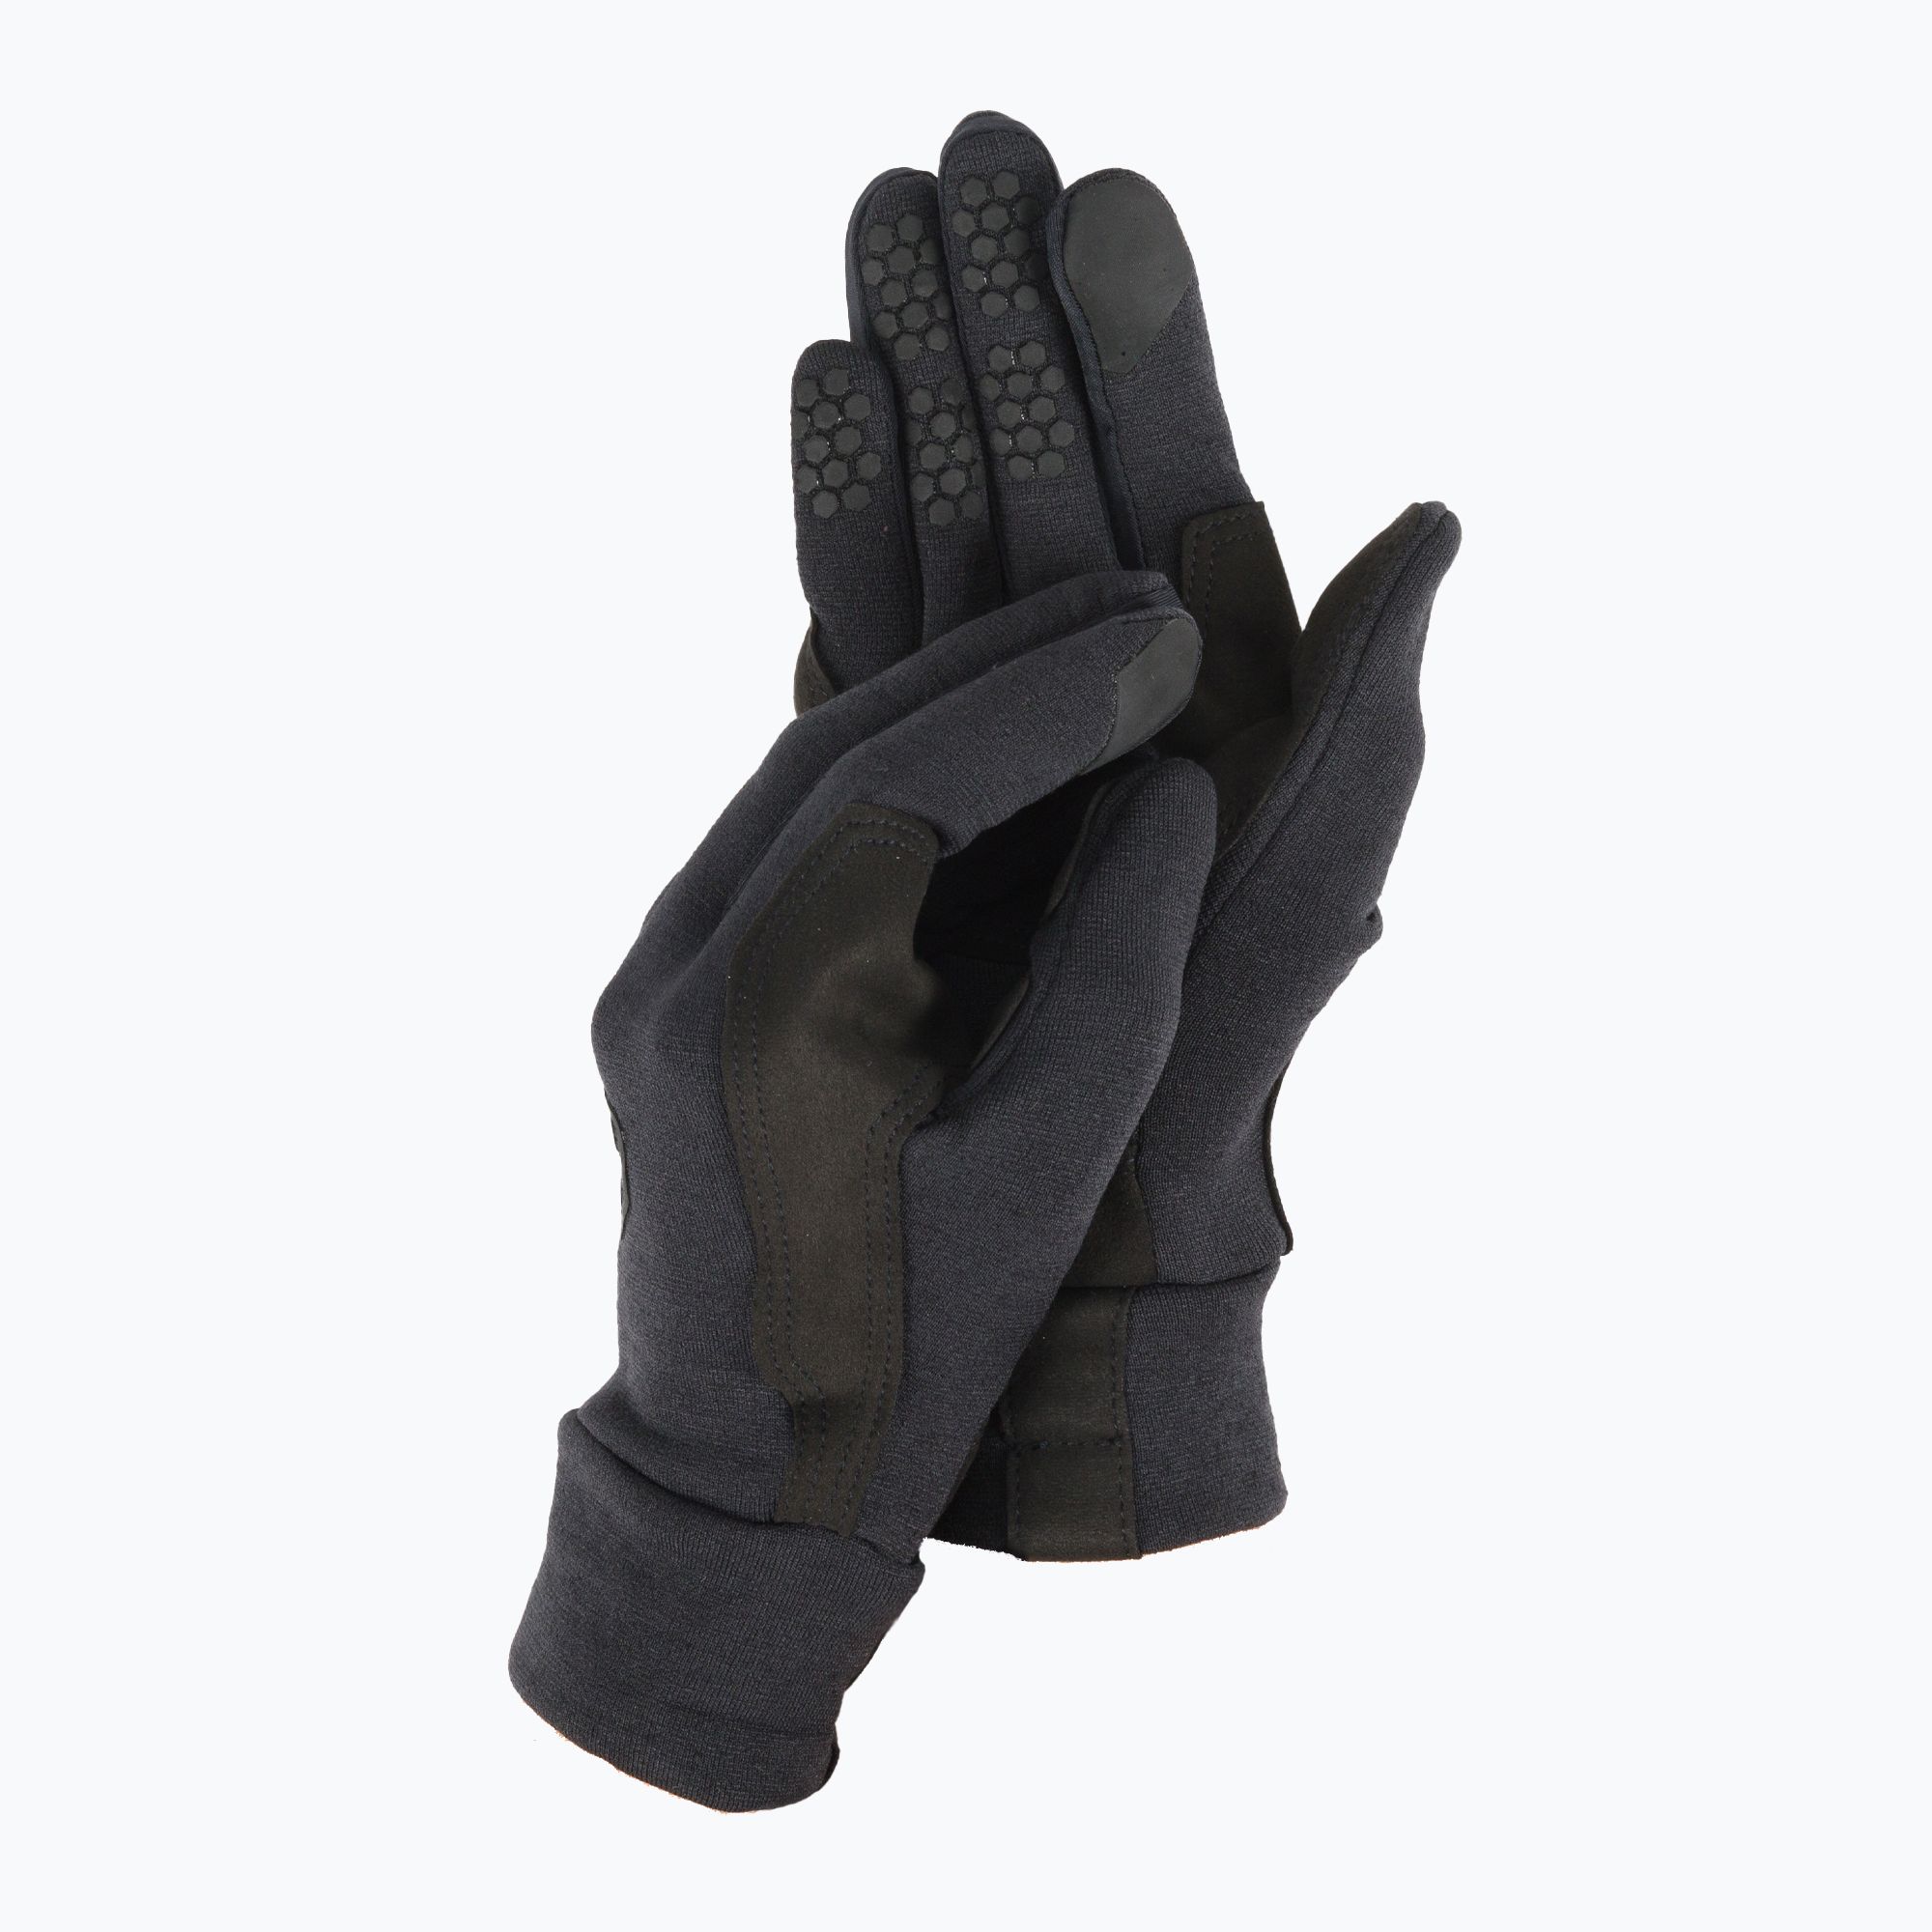 Gloves Gusty black 801408.12 Mountaineering Touch ZIENER